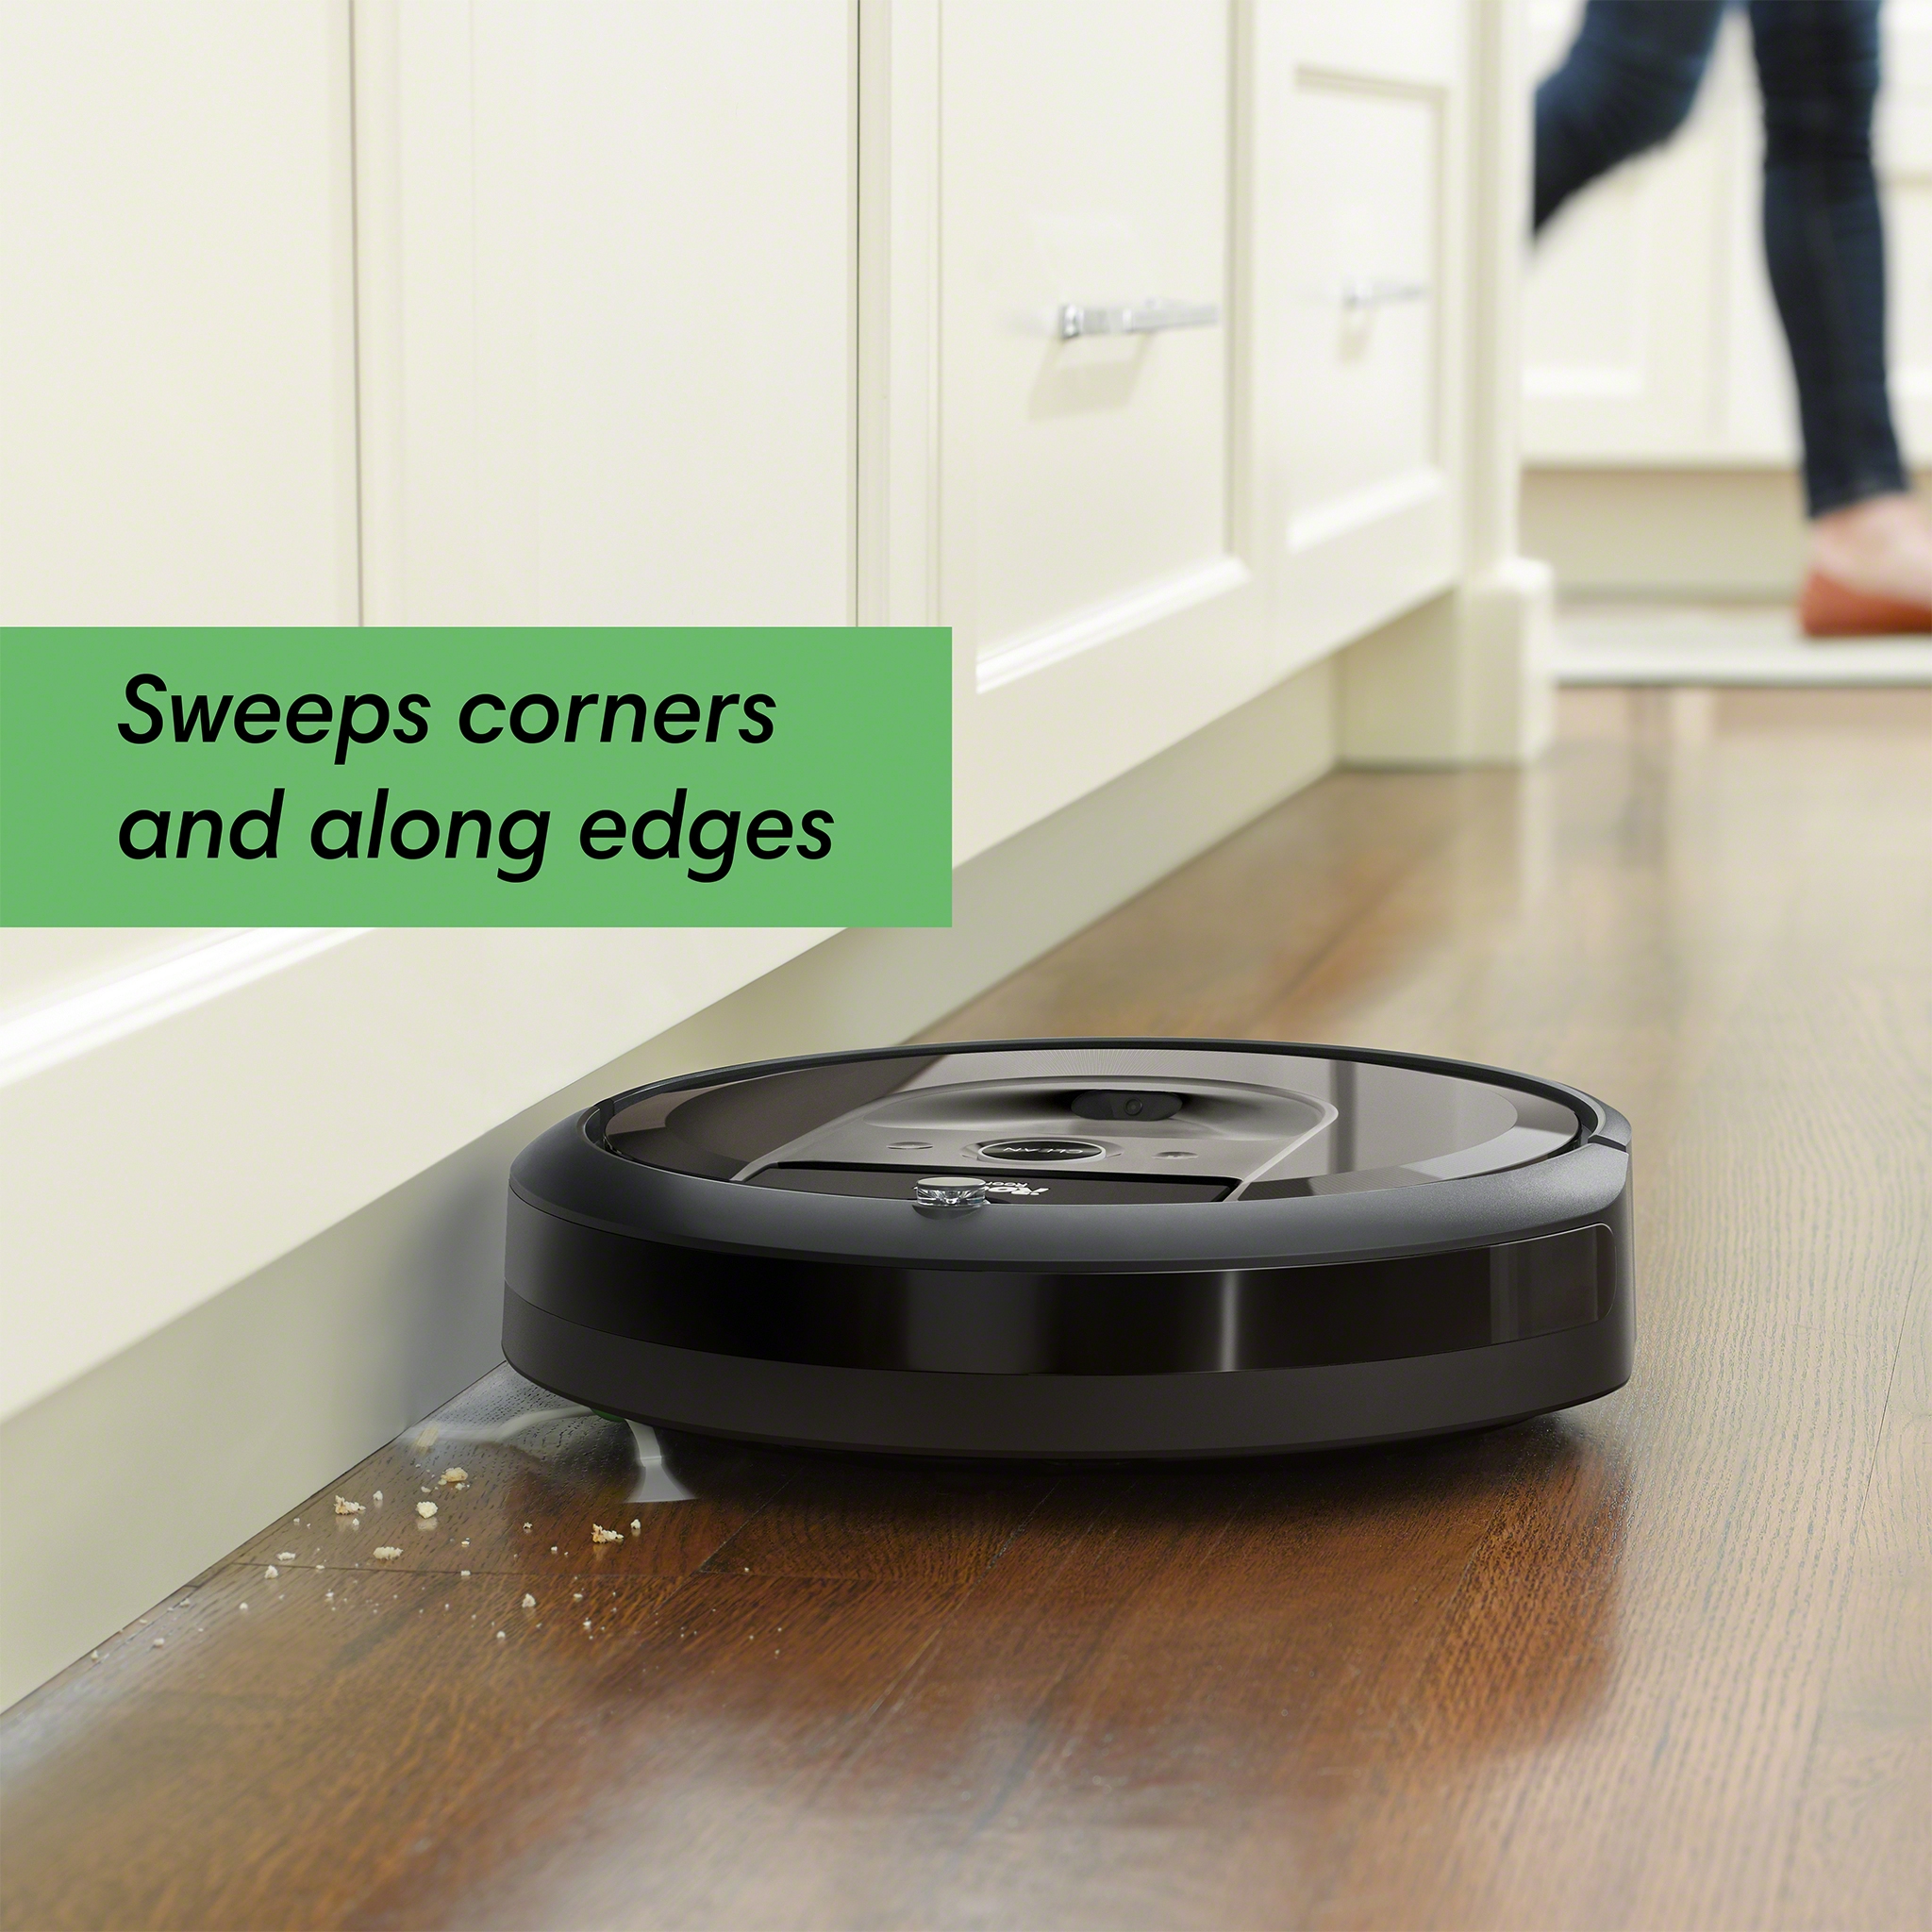 iRobot Roomba i7 (7150) Robot Vacuum- Wi-Fi Connected, Smart Mapping, Works with Google Home, Ideal for Pet Hair, Carpets, Hard Floors - image 12 of 16